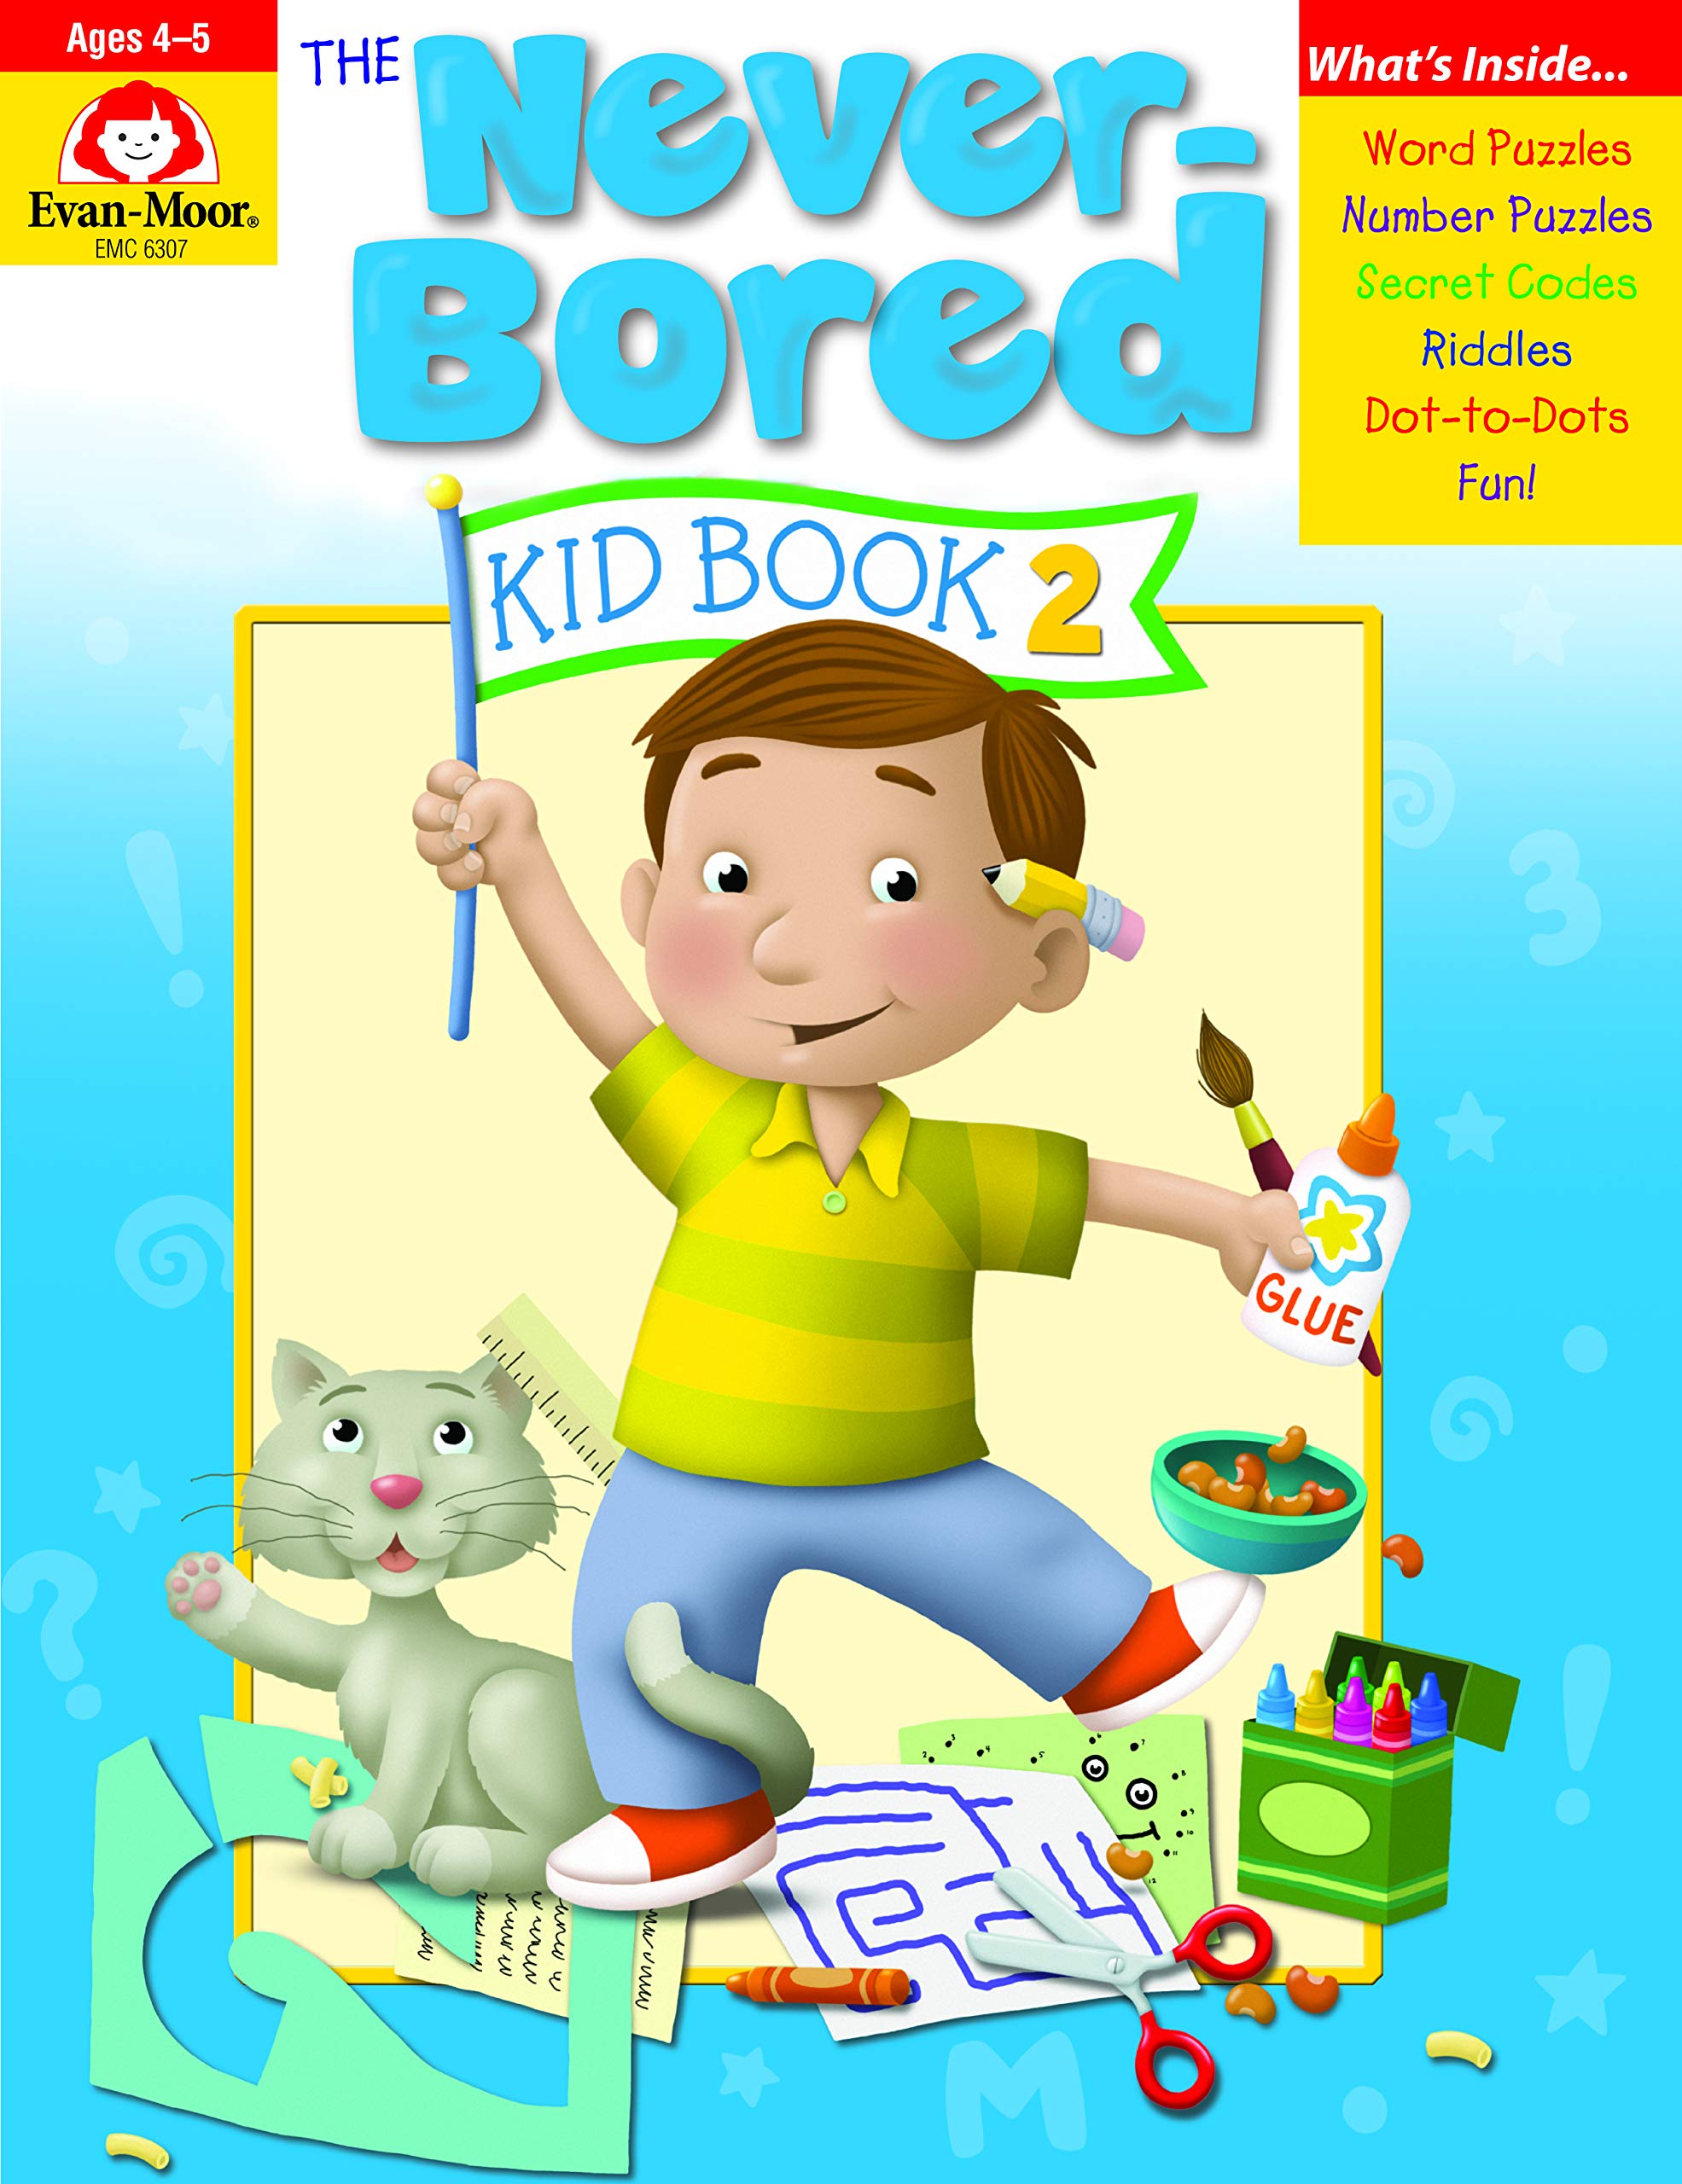 The Never-Bored (Ages 4-5) Kid Book 2